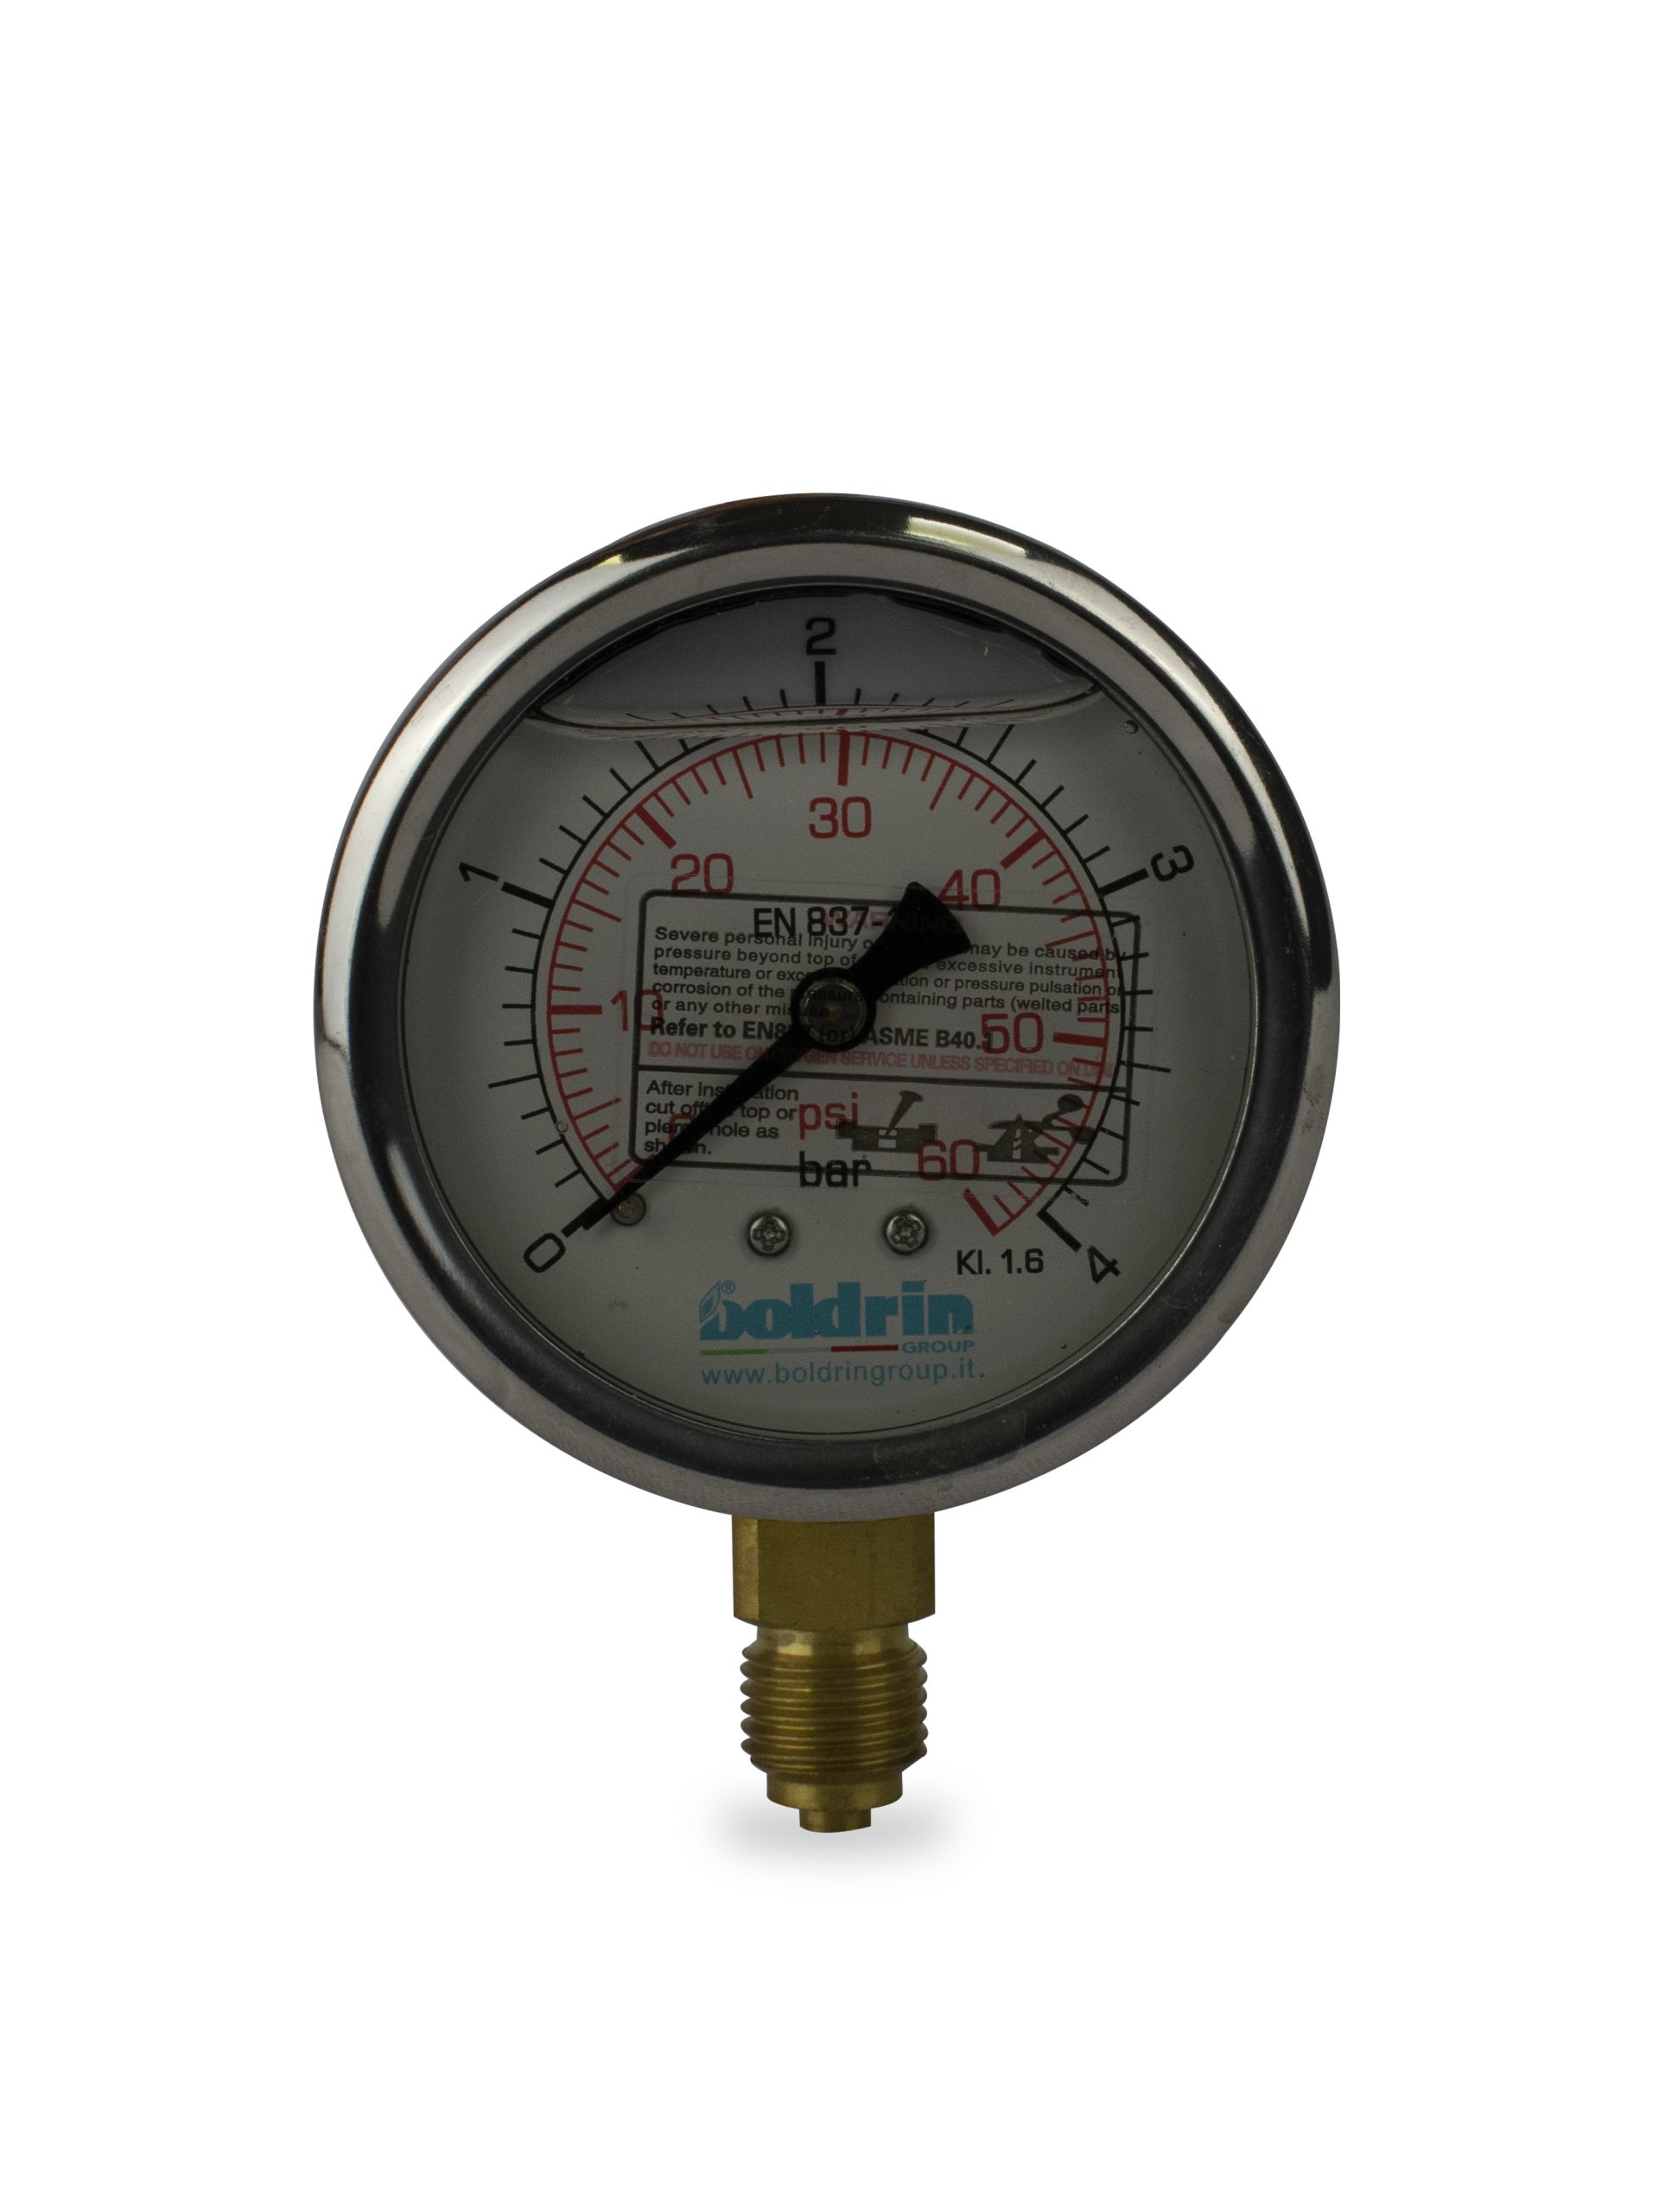 PRESSURE GAUGE 0-4 BAR DIAMETER 2 1/2 Inches  CONNECTION 1/4 Inches from Gas Equipment Company Llc Abu Dhabi, UNITED ARAB EMIRATES